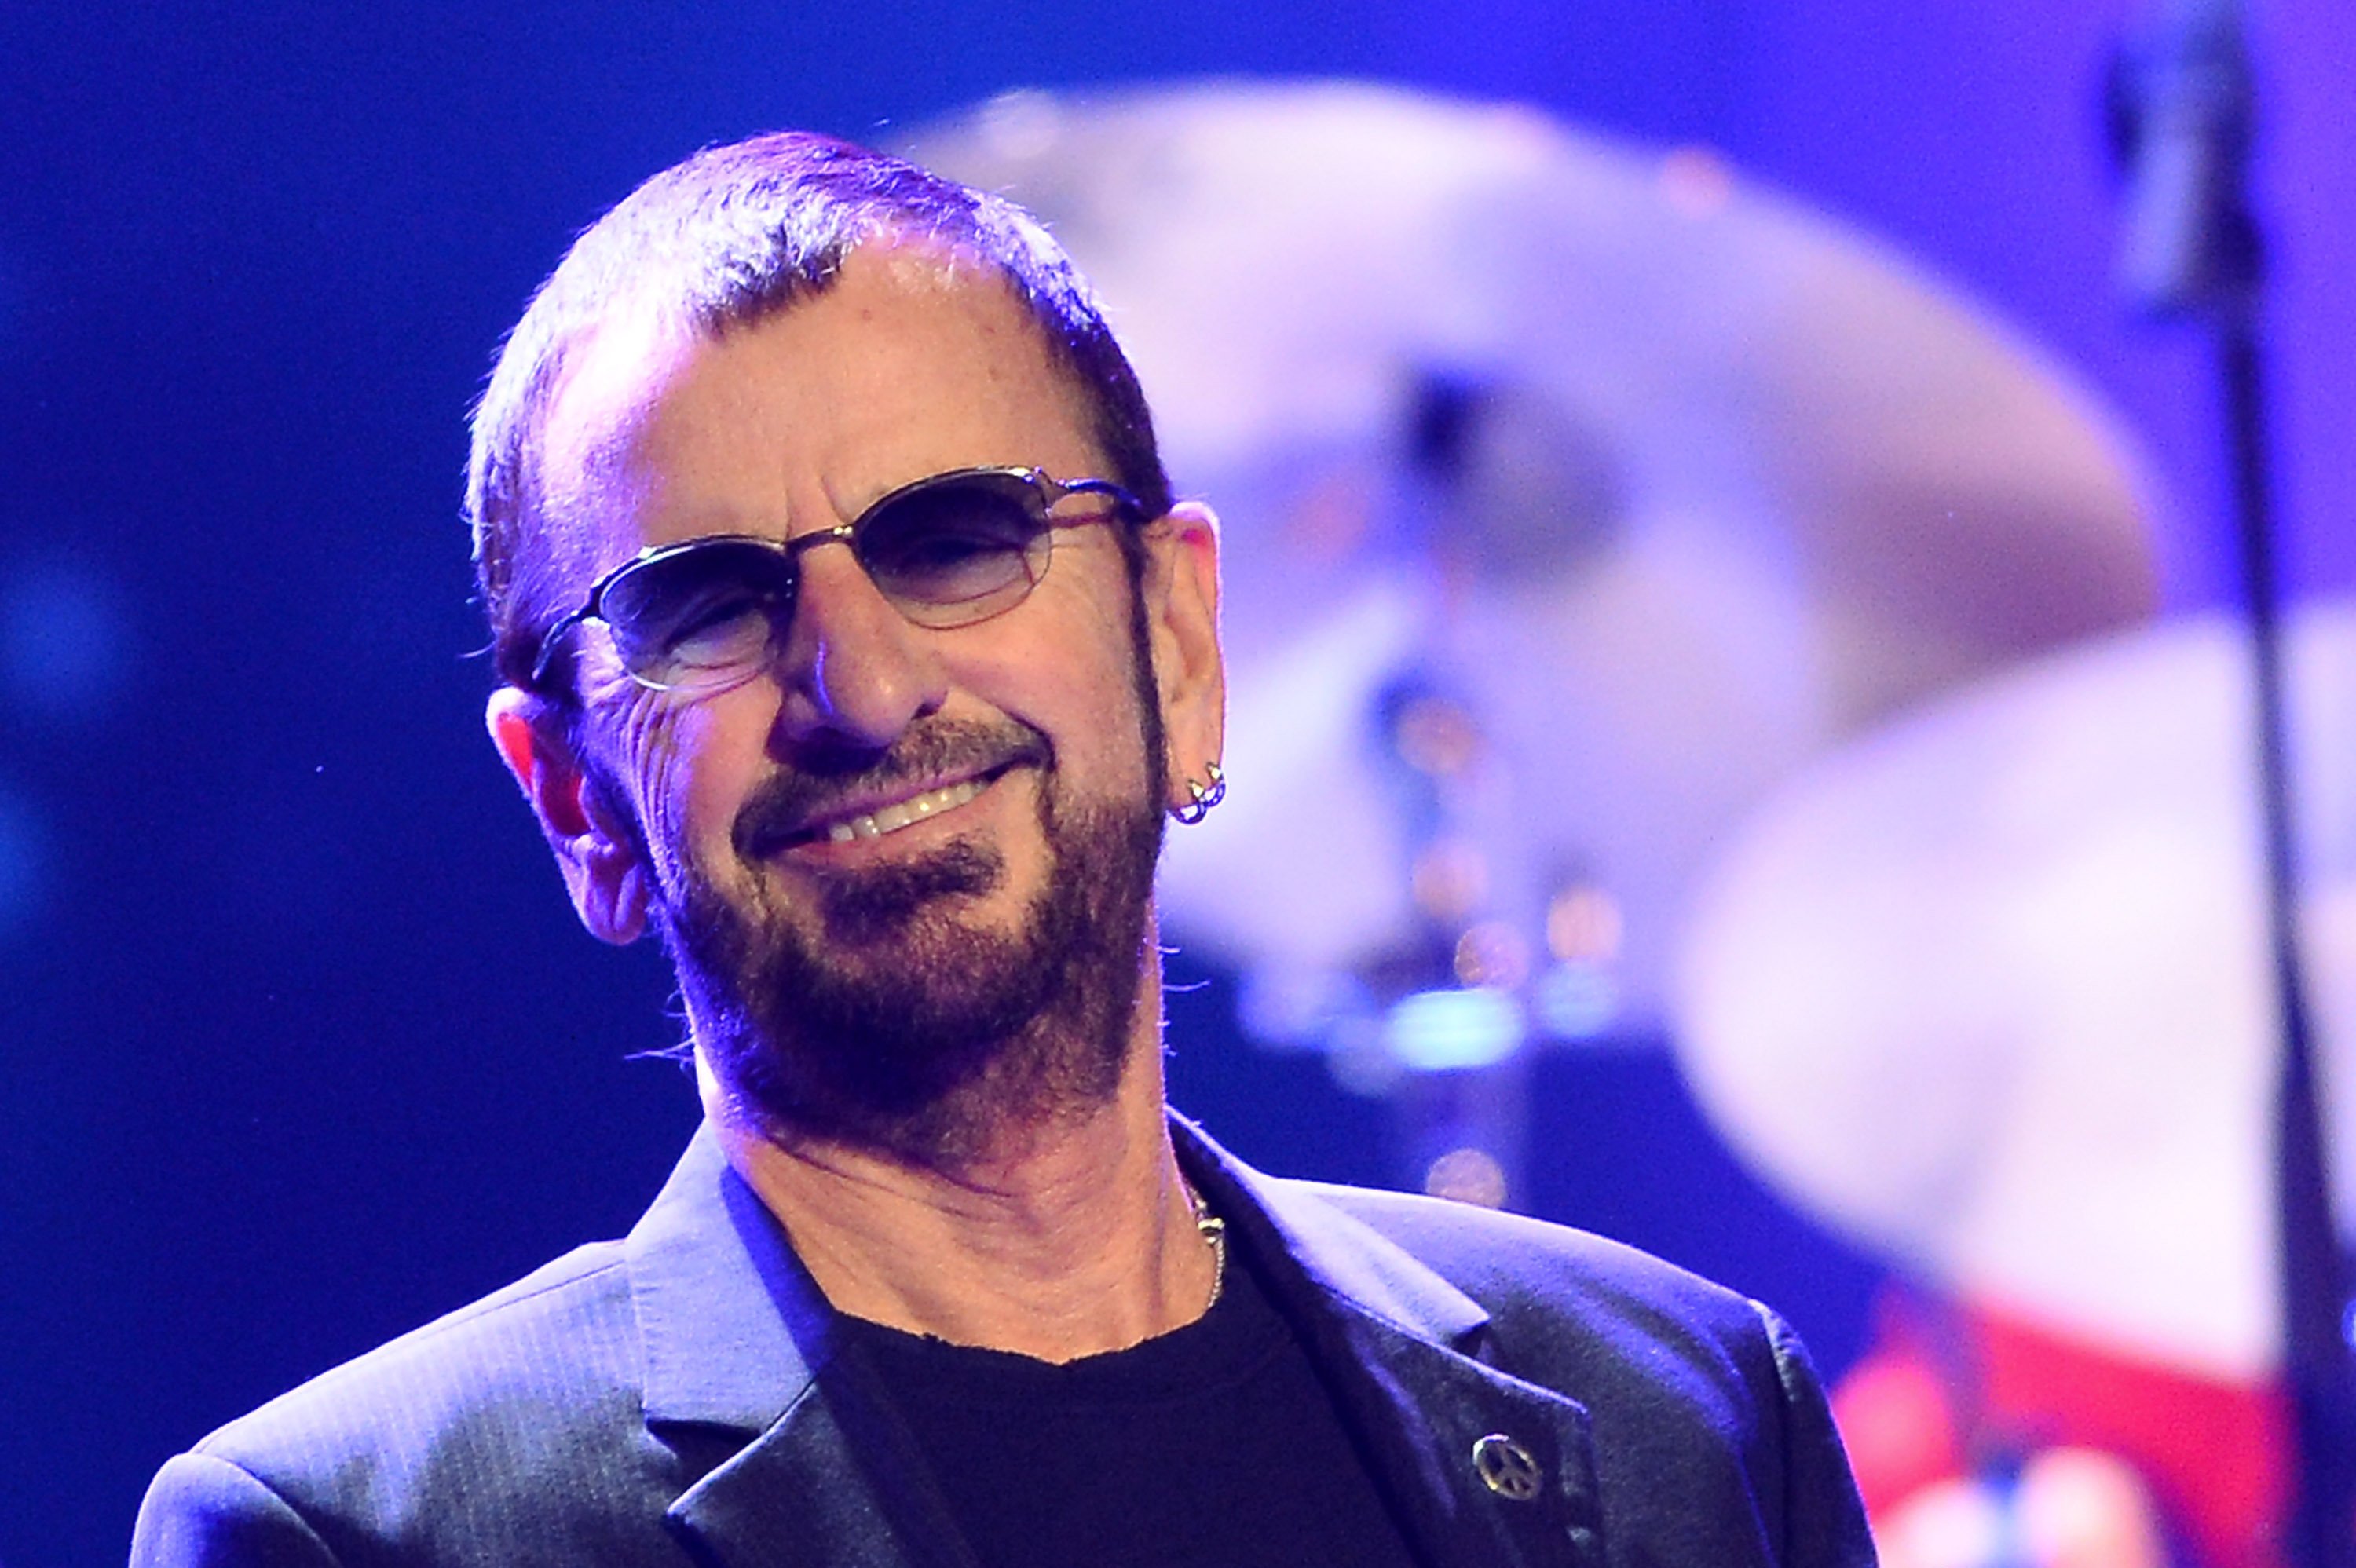 Ringo Starr of The Beatles performs with the All-Starr Band at the Palms Casino Resort in Las Vegas, Nevada, in 2013